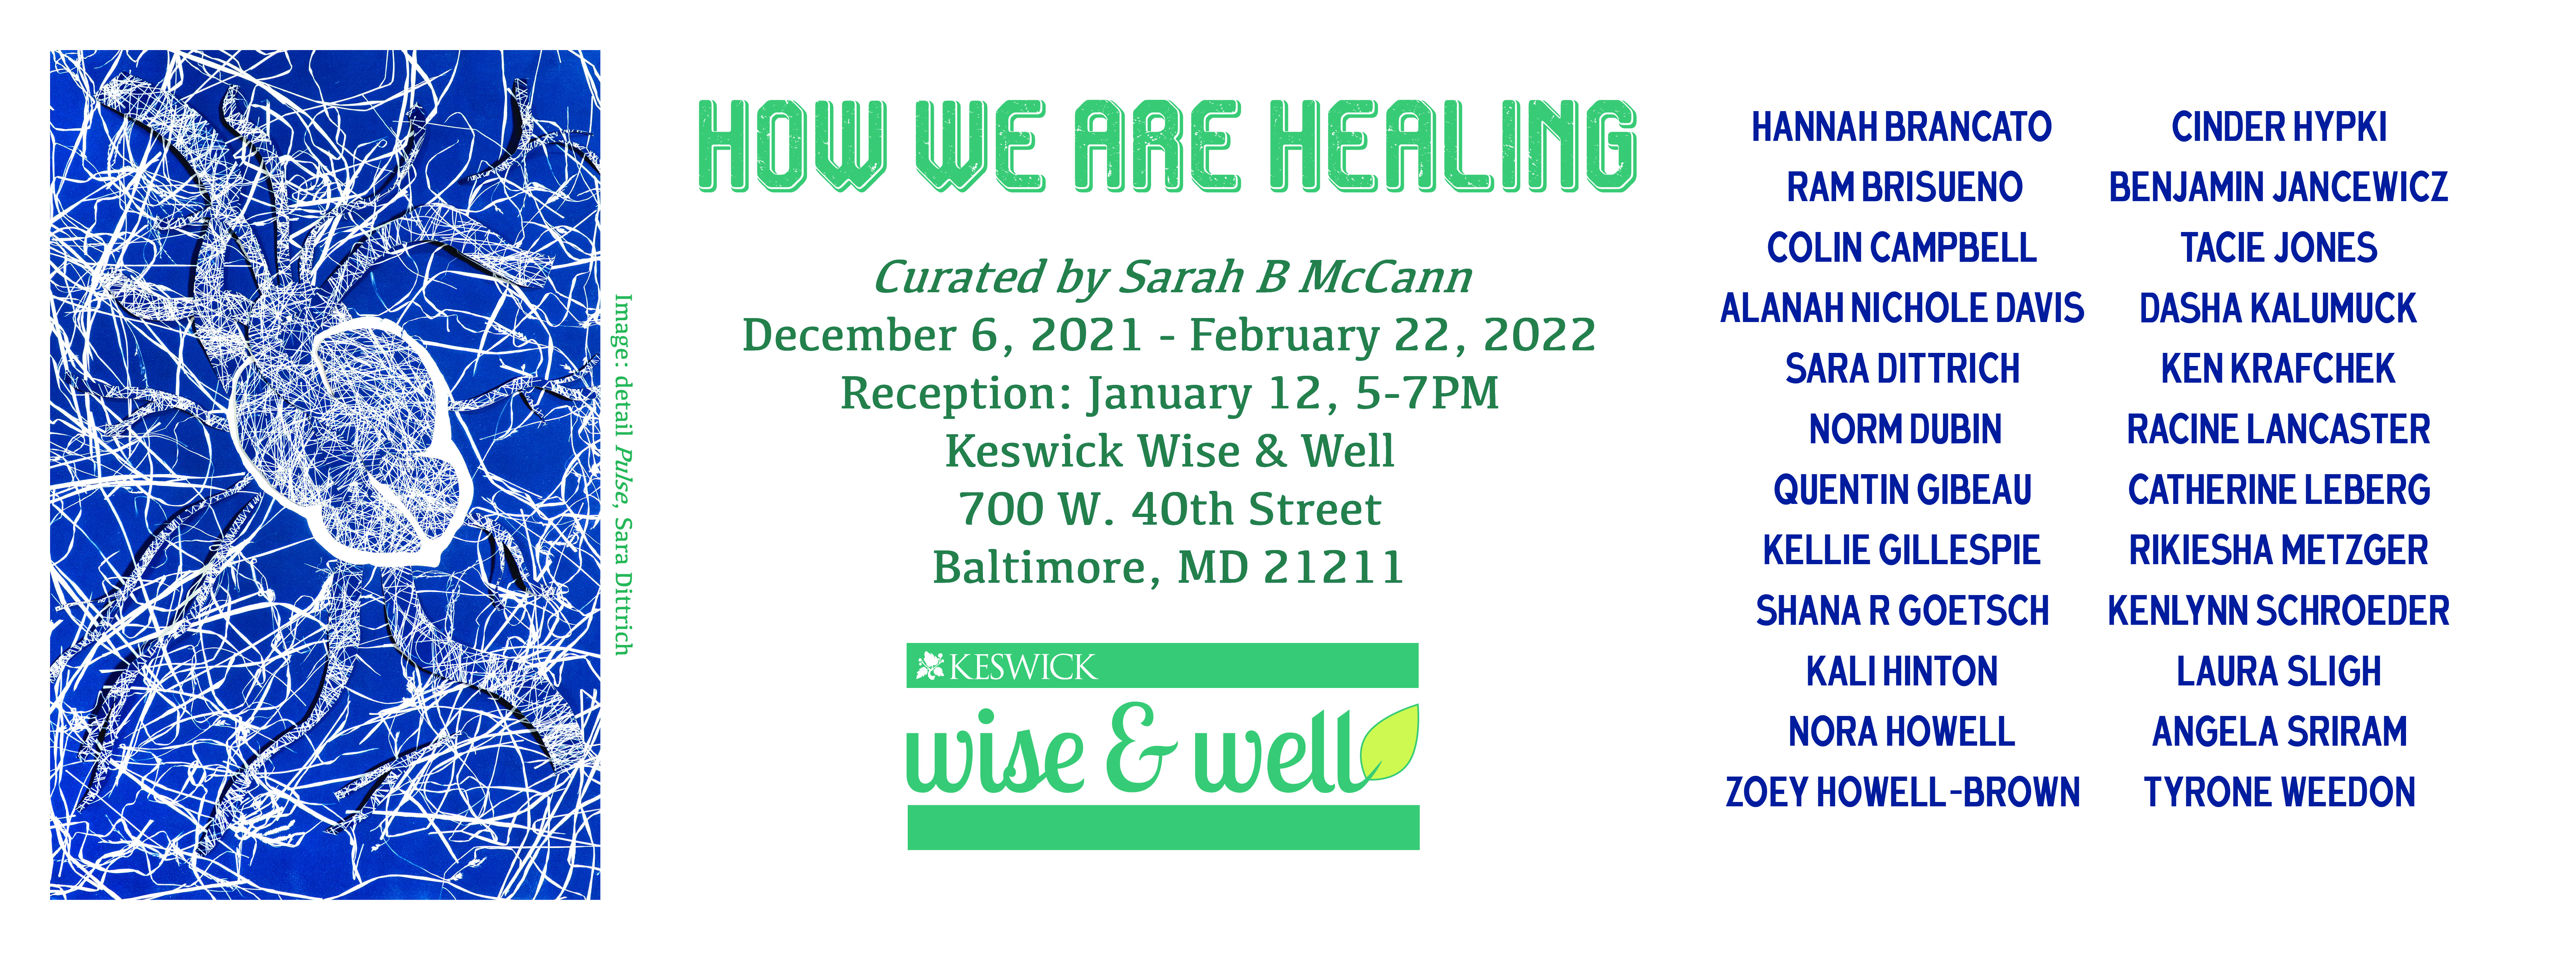 HOW WE ARE HEALING  Curated by Sarah B. McCann  December 6, 2021 - February 22, 2022  Reception: January 12, 5-7PM  Keswick Wise & Well  700 W. 40th Street  Baltimore, MD 21211